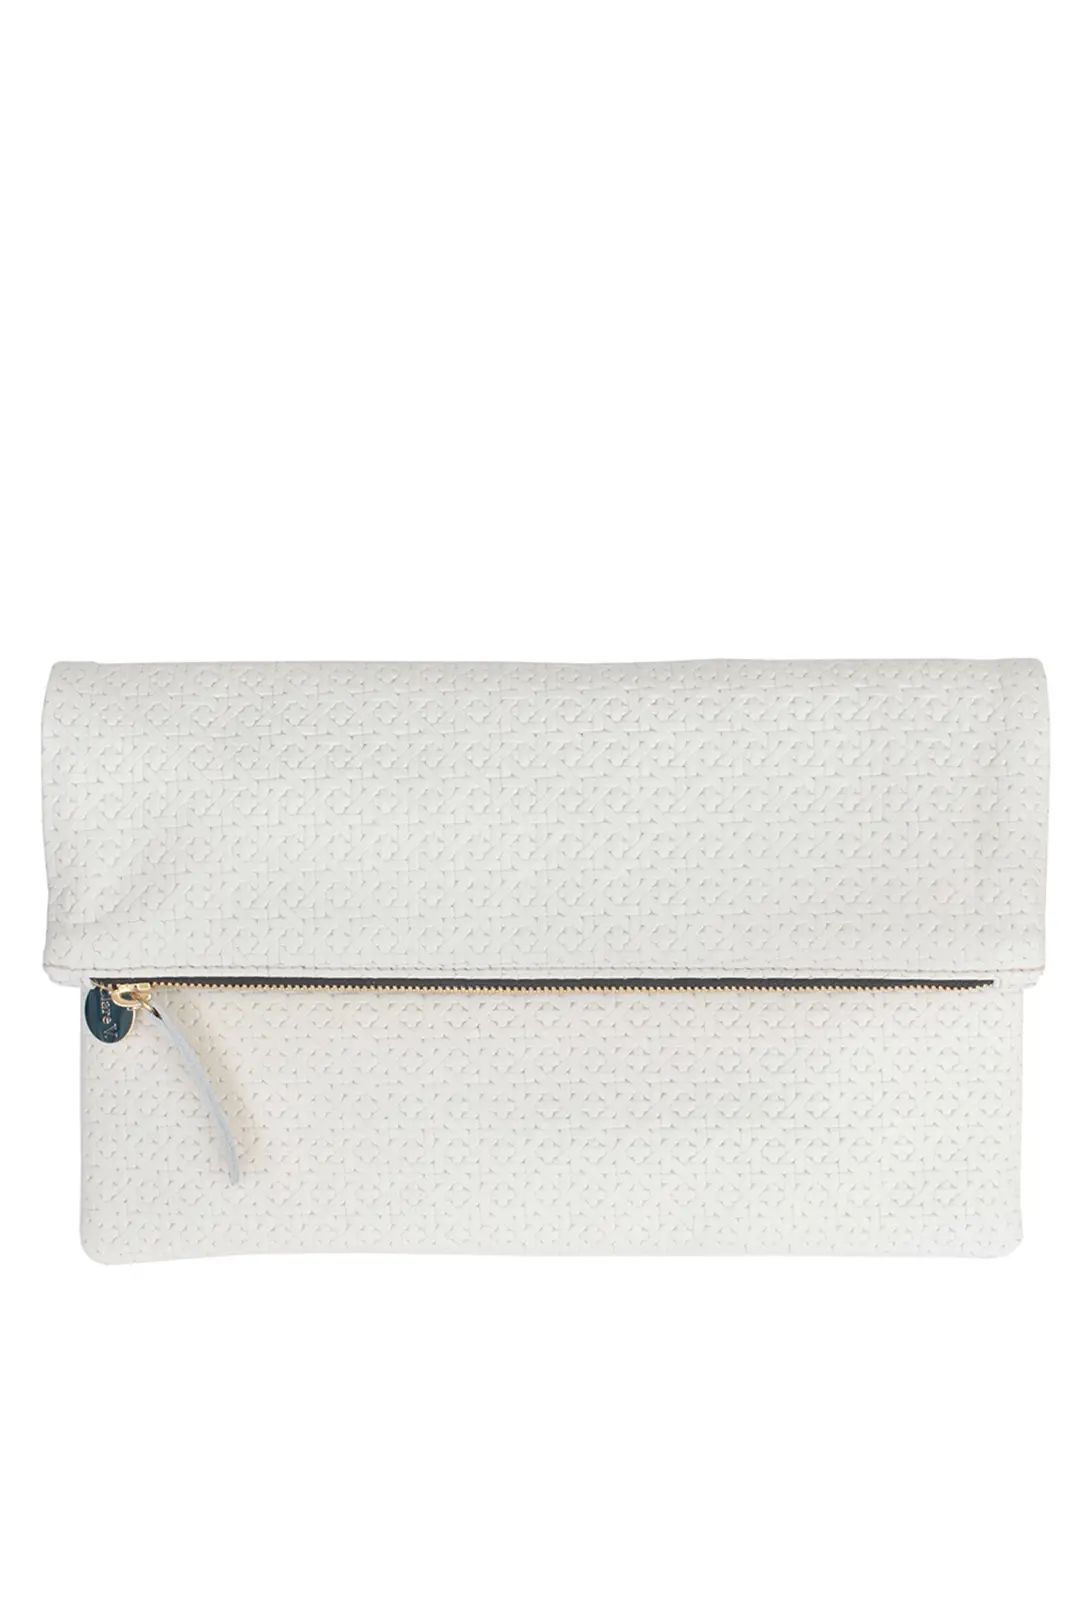 Clare V. Crosshatch Foldover Clutch | Rent The Runway